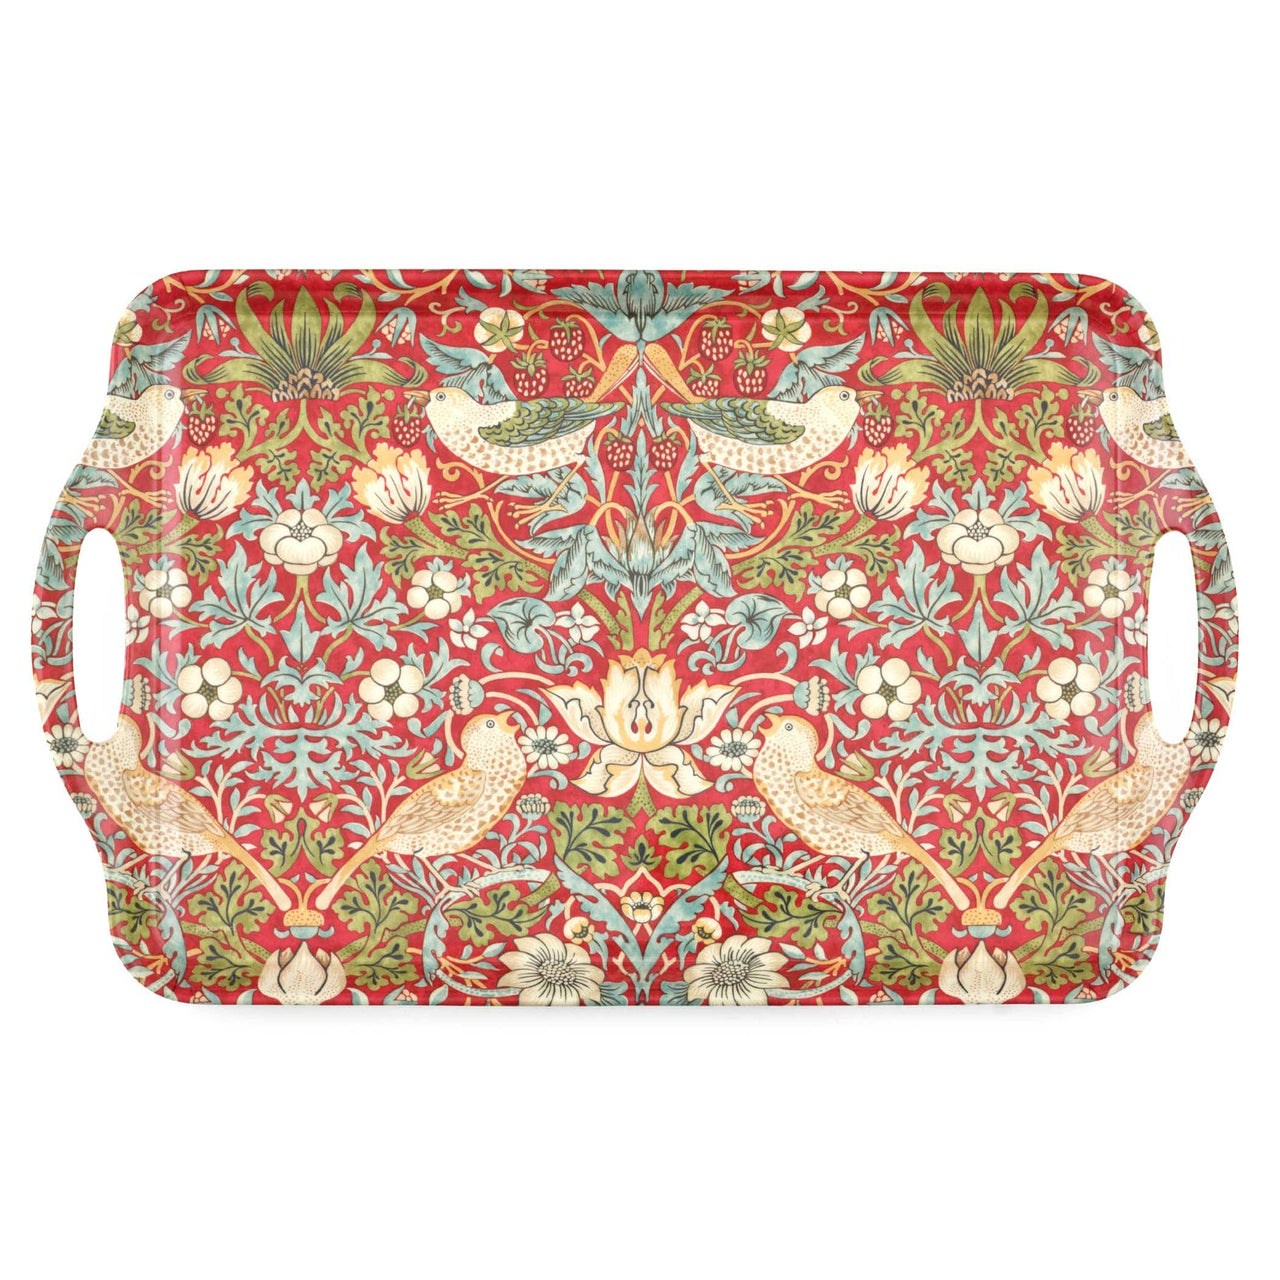 William Morris Strawberry Thief Large Mel. Hand. Tray - Red Pimpernel default